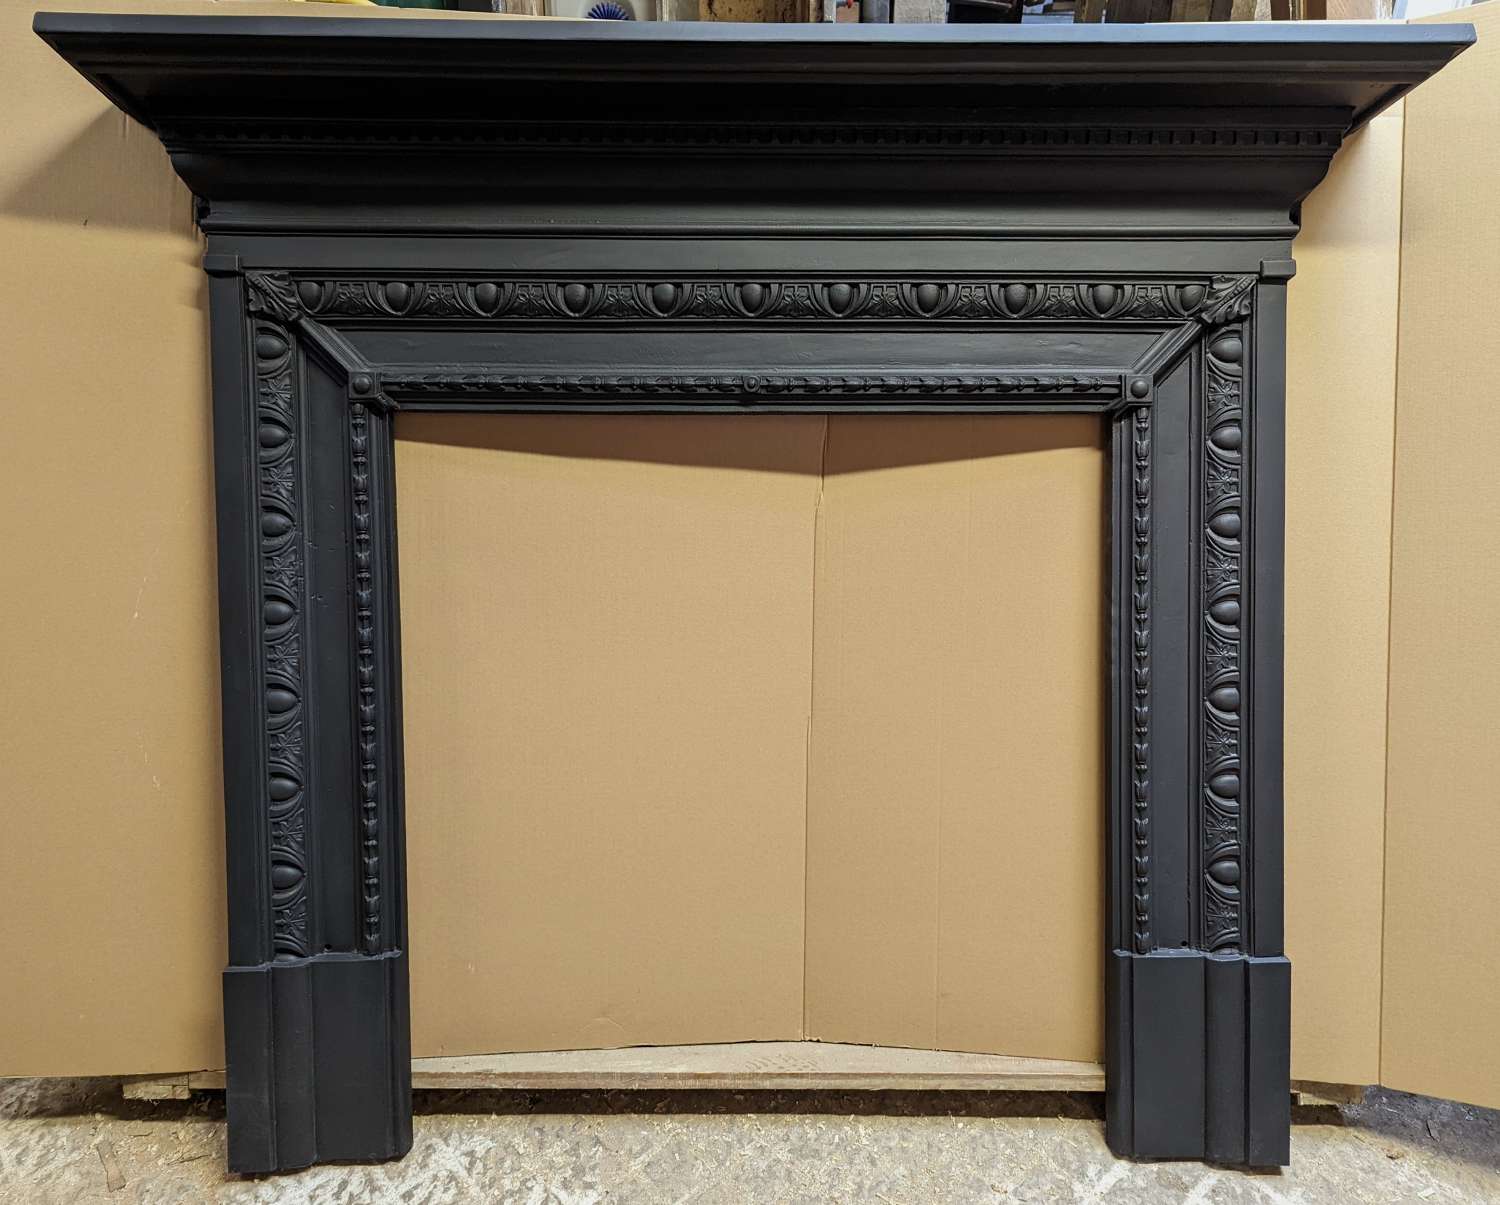 FS0223 A VERY LARGE RECLAIMED VICTORIAN CAST IRON FIRE SURROUND